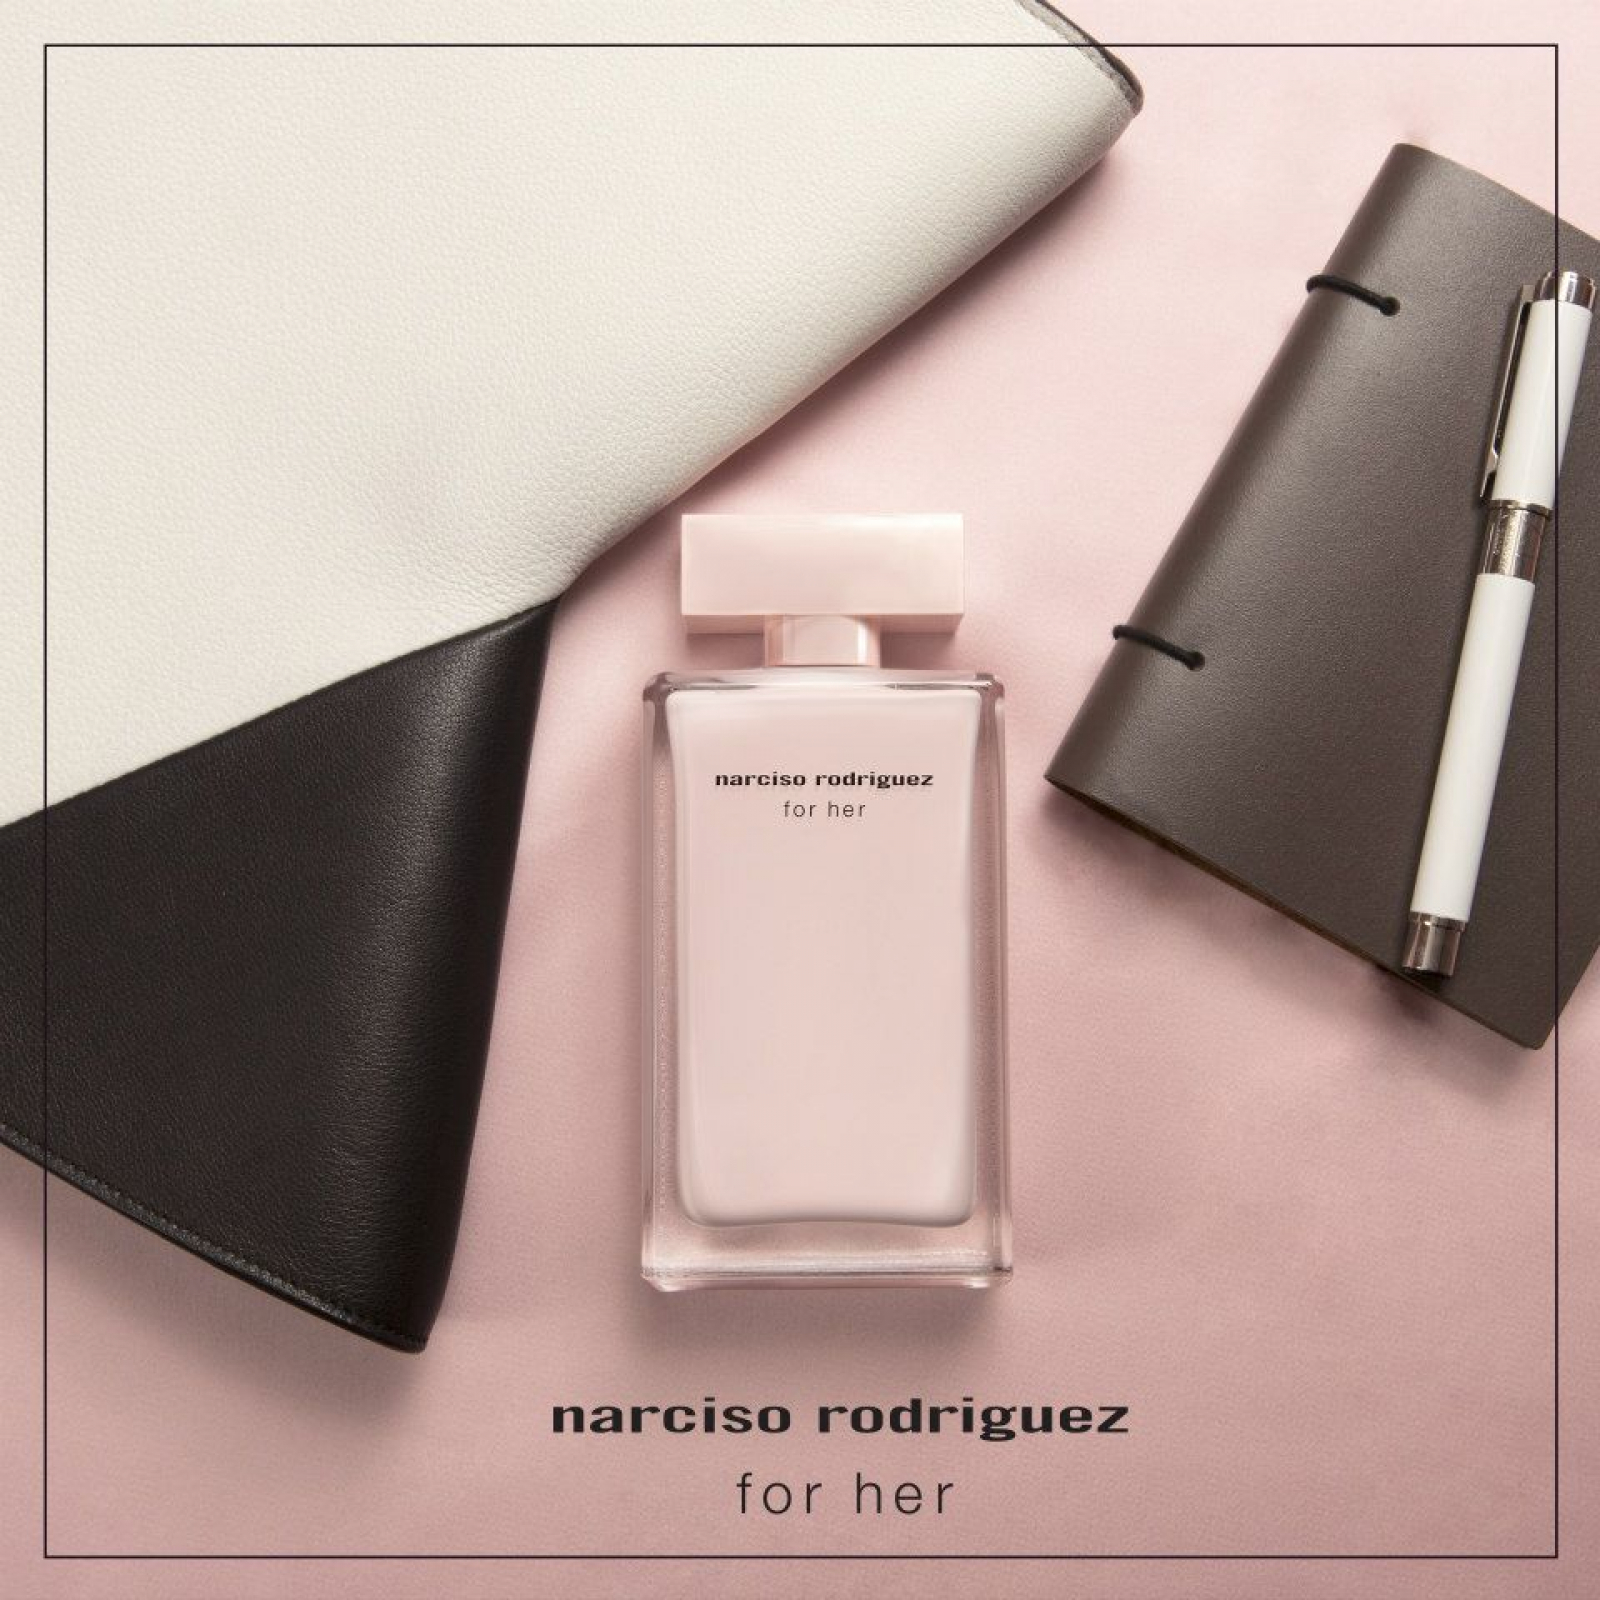 NARCISO RODRIGUEZ FOR HER EDP 100ml 50ml